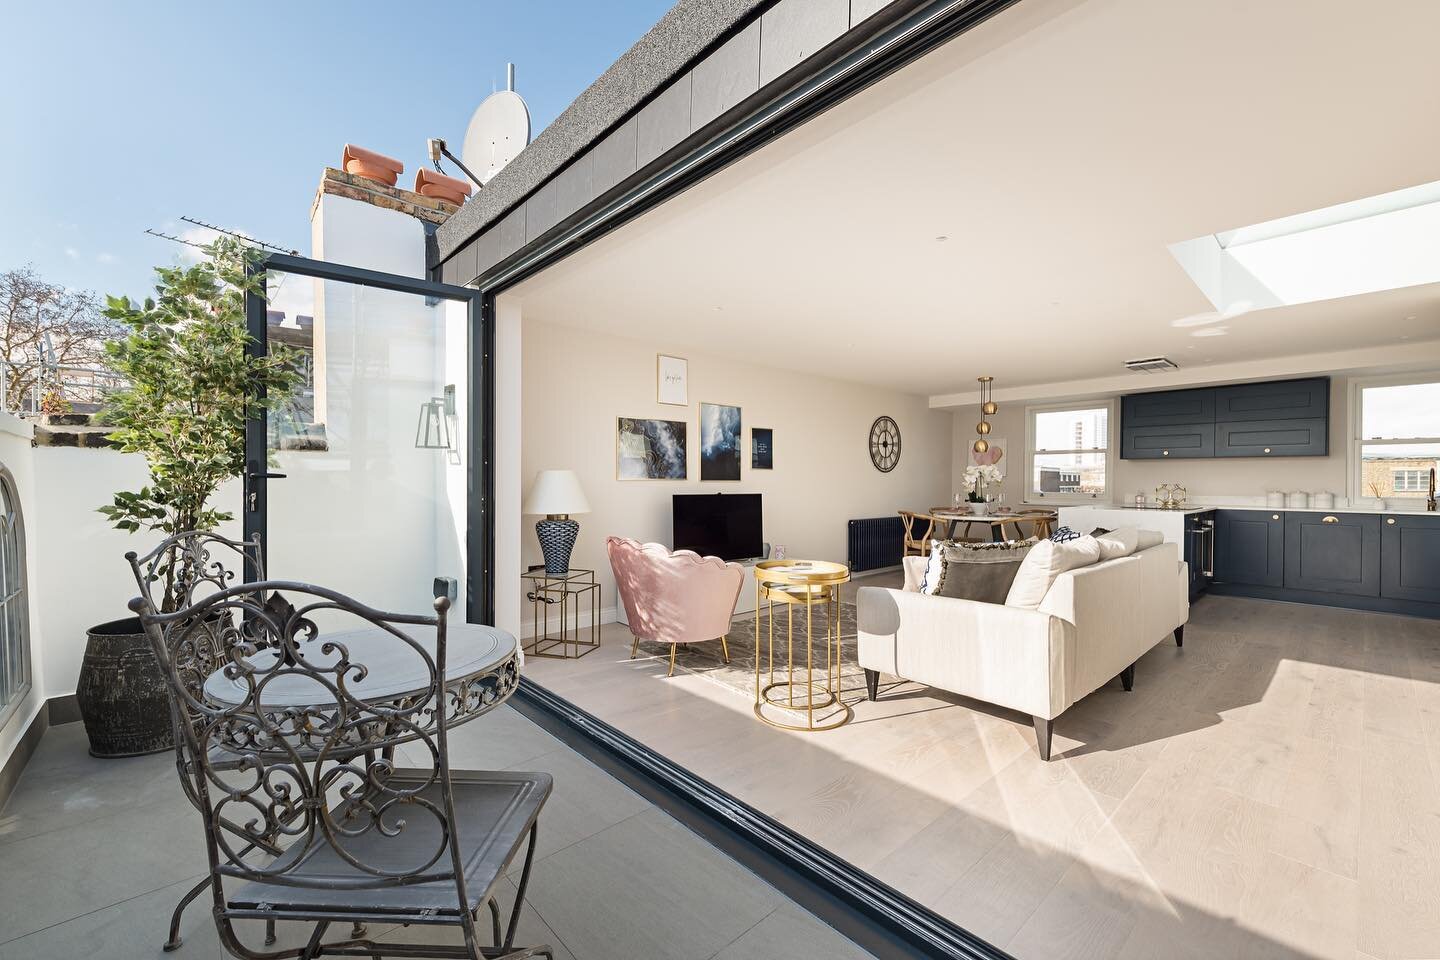 Bringing the outdoors in and the indoors our, these bifold doors effortlessly connect this open plan Notting Hill apartment to the sunny roof terrace, creating the ultimate indoor/outdoor living experience

Discover the transformative power of archit